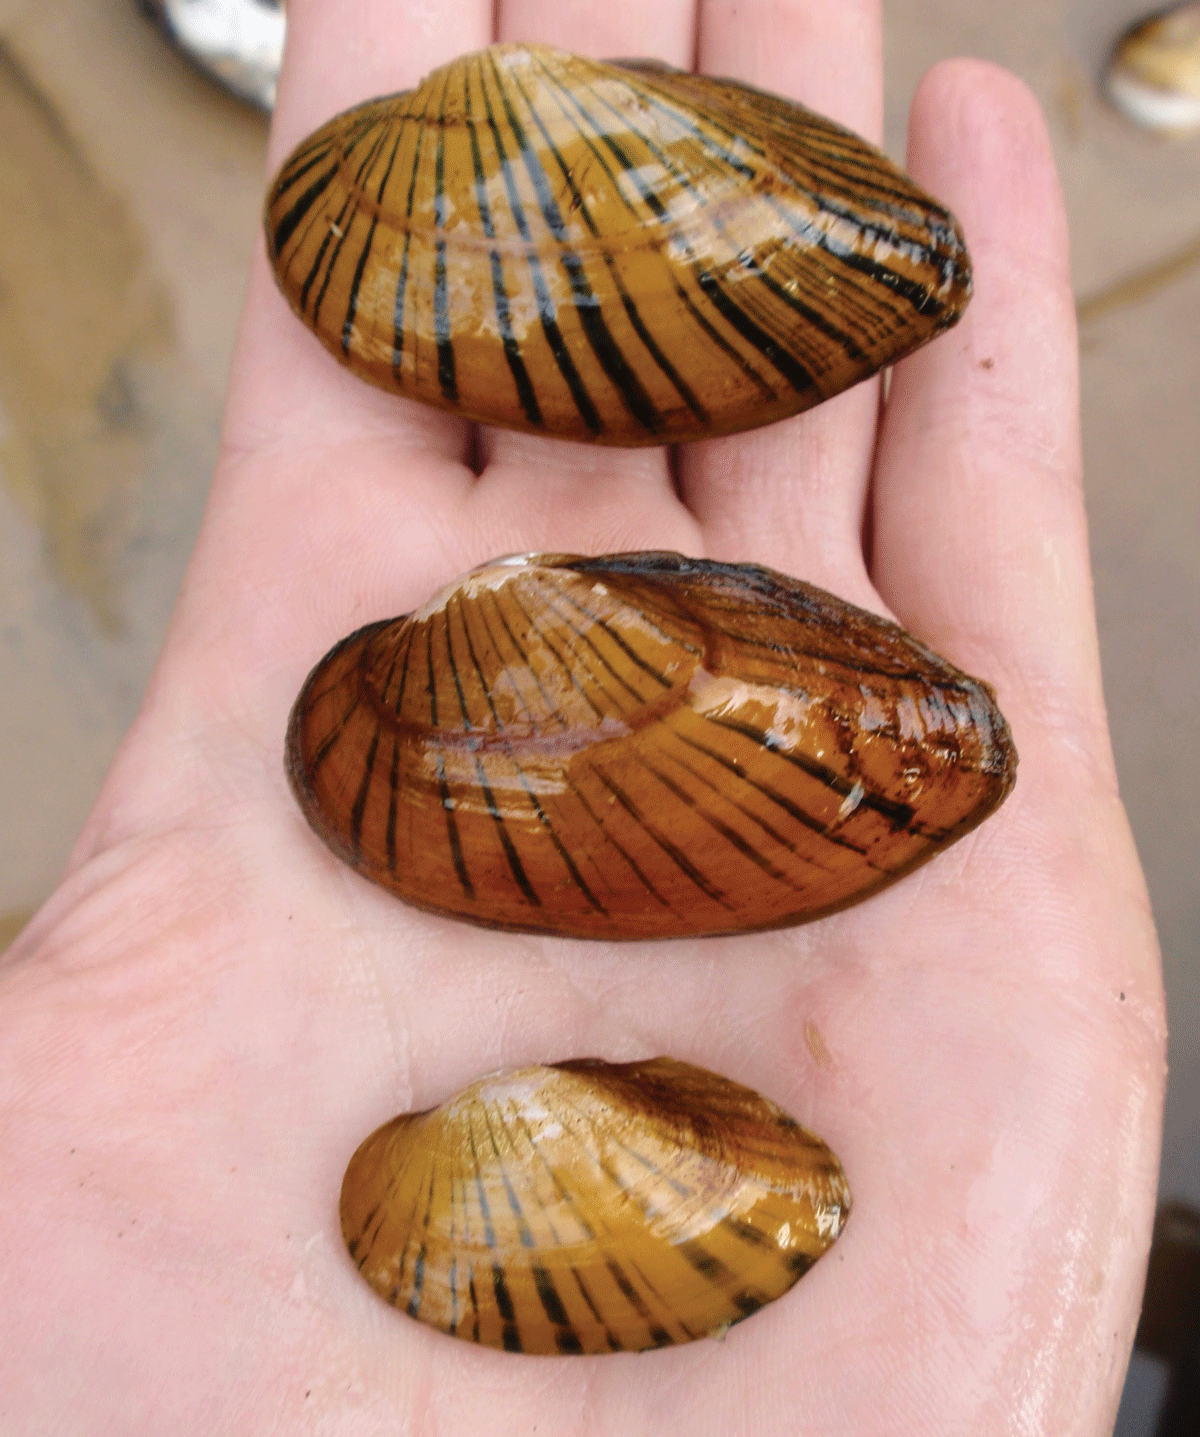 Several Hamiota subangulata mussels (2–3 inches in length) in the hand of a scientist.